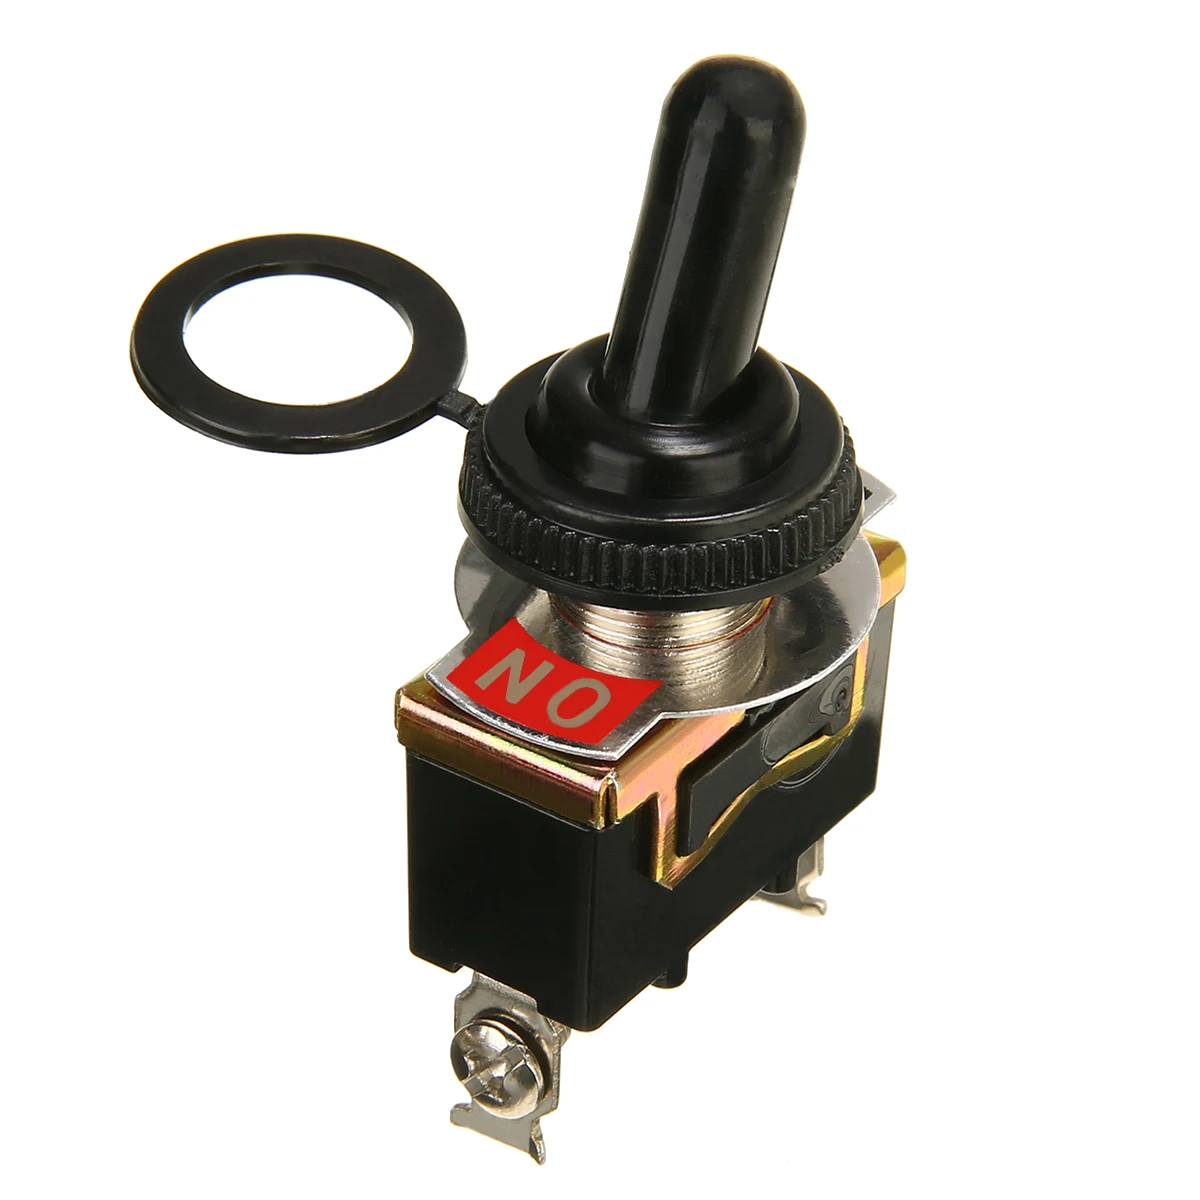 Details about   New SPST 2Pin Heavy Duty 15A 250V ON/OFF Rocker Toggle Switch 